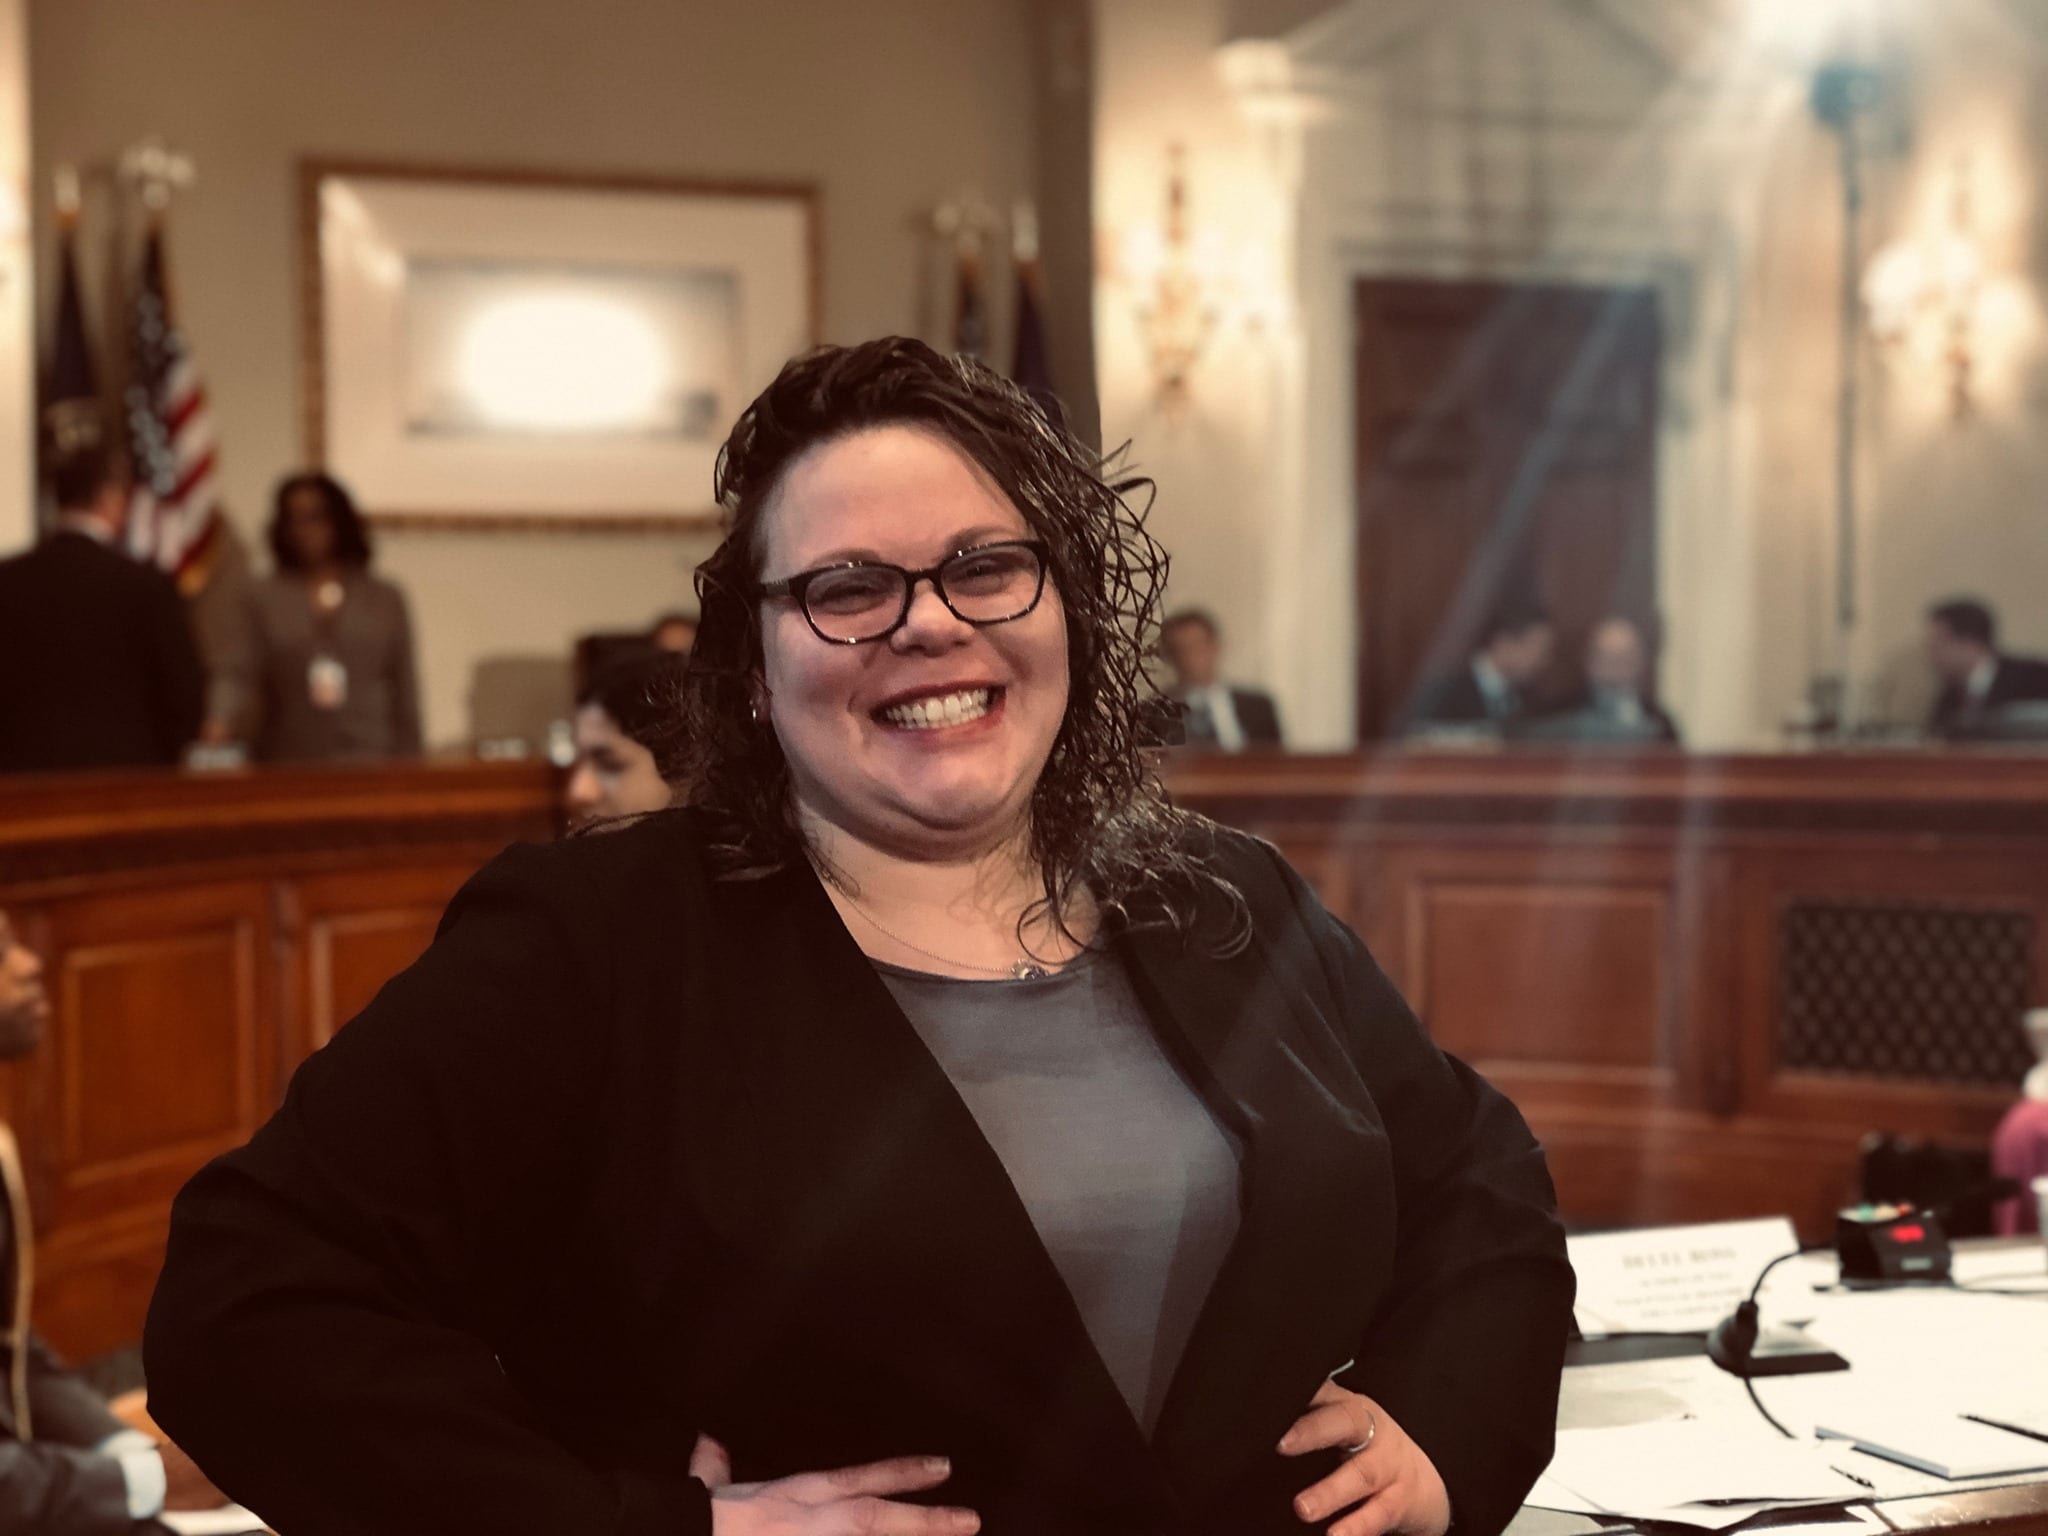 Michelle Bishop smiles for the camera before the "Voting Rights and Election Administration in America" hearing in October 2019.